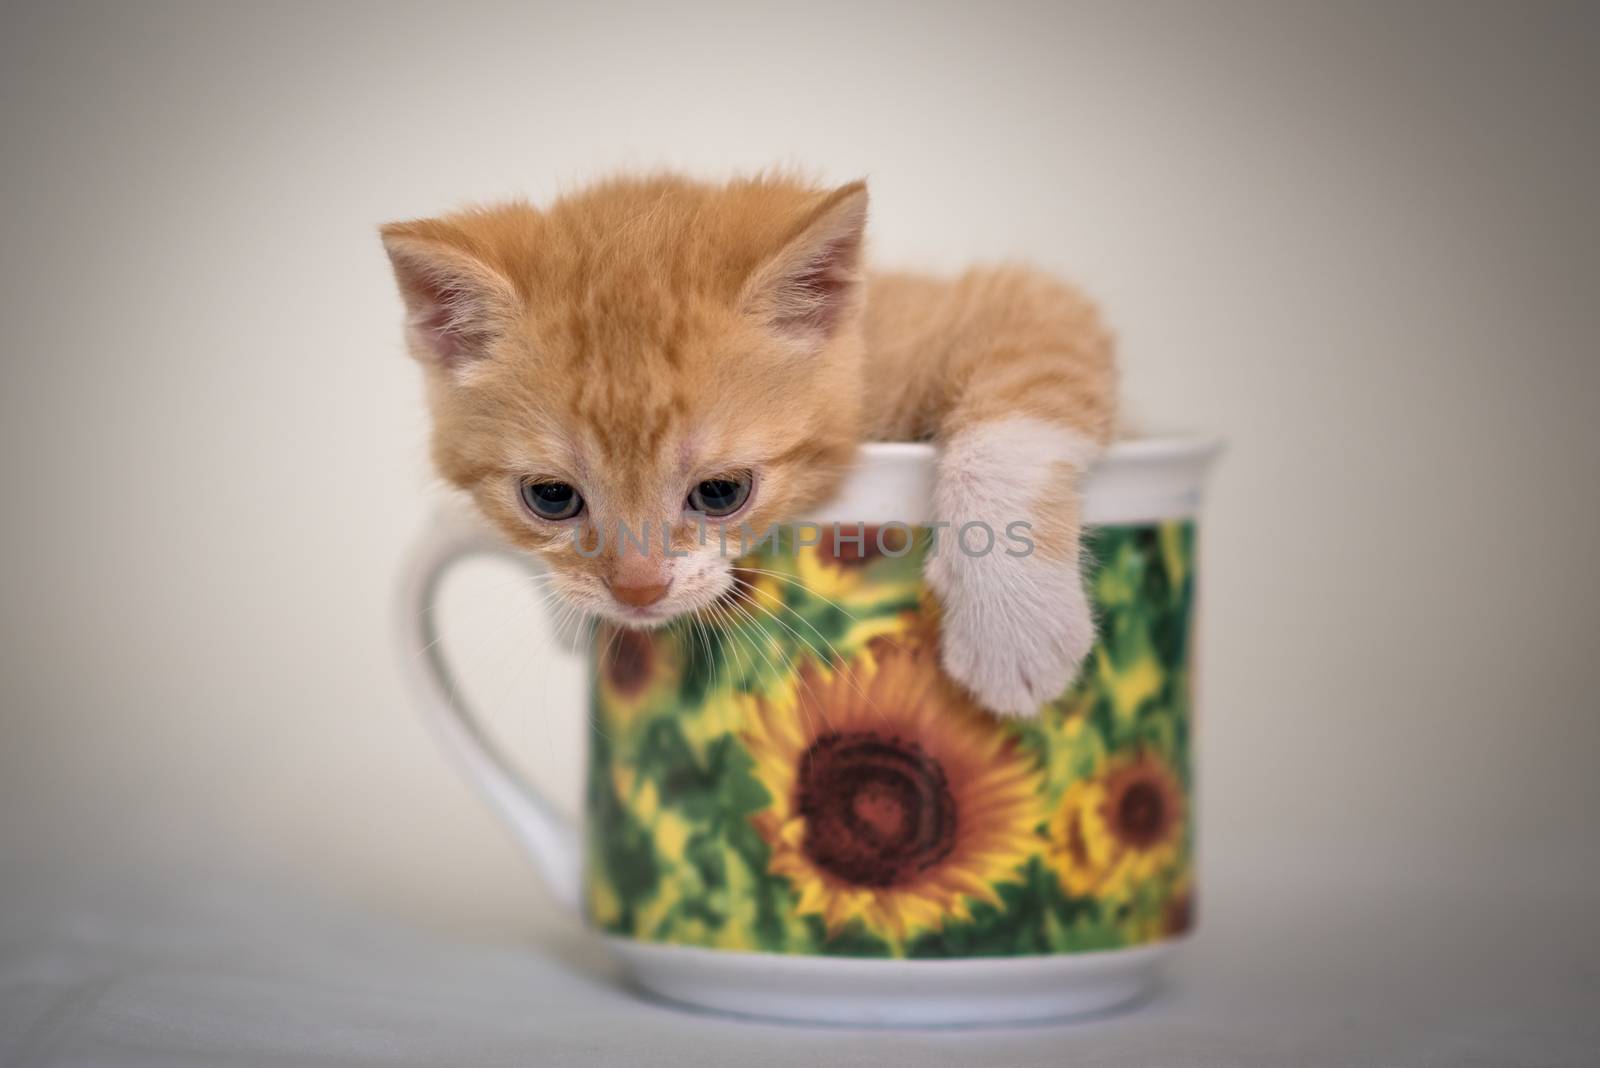 Cute little kitten in cup trapped in a cup